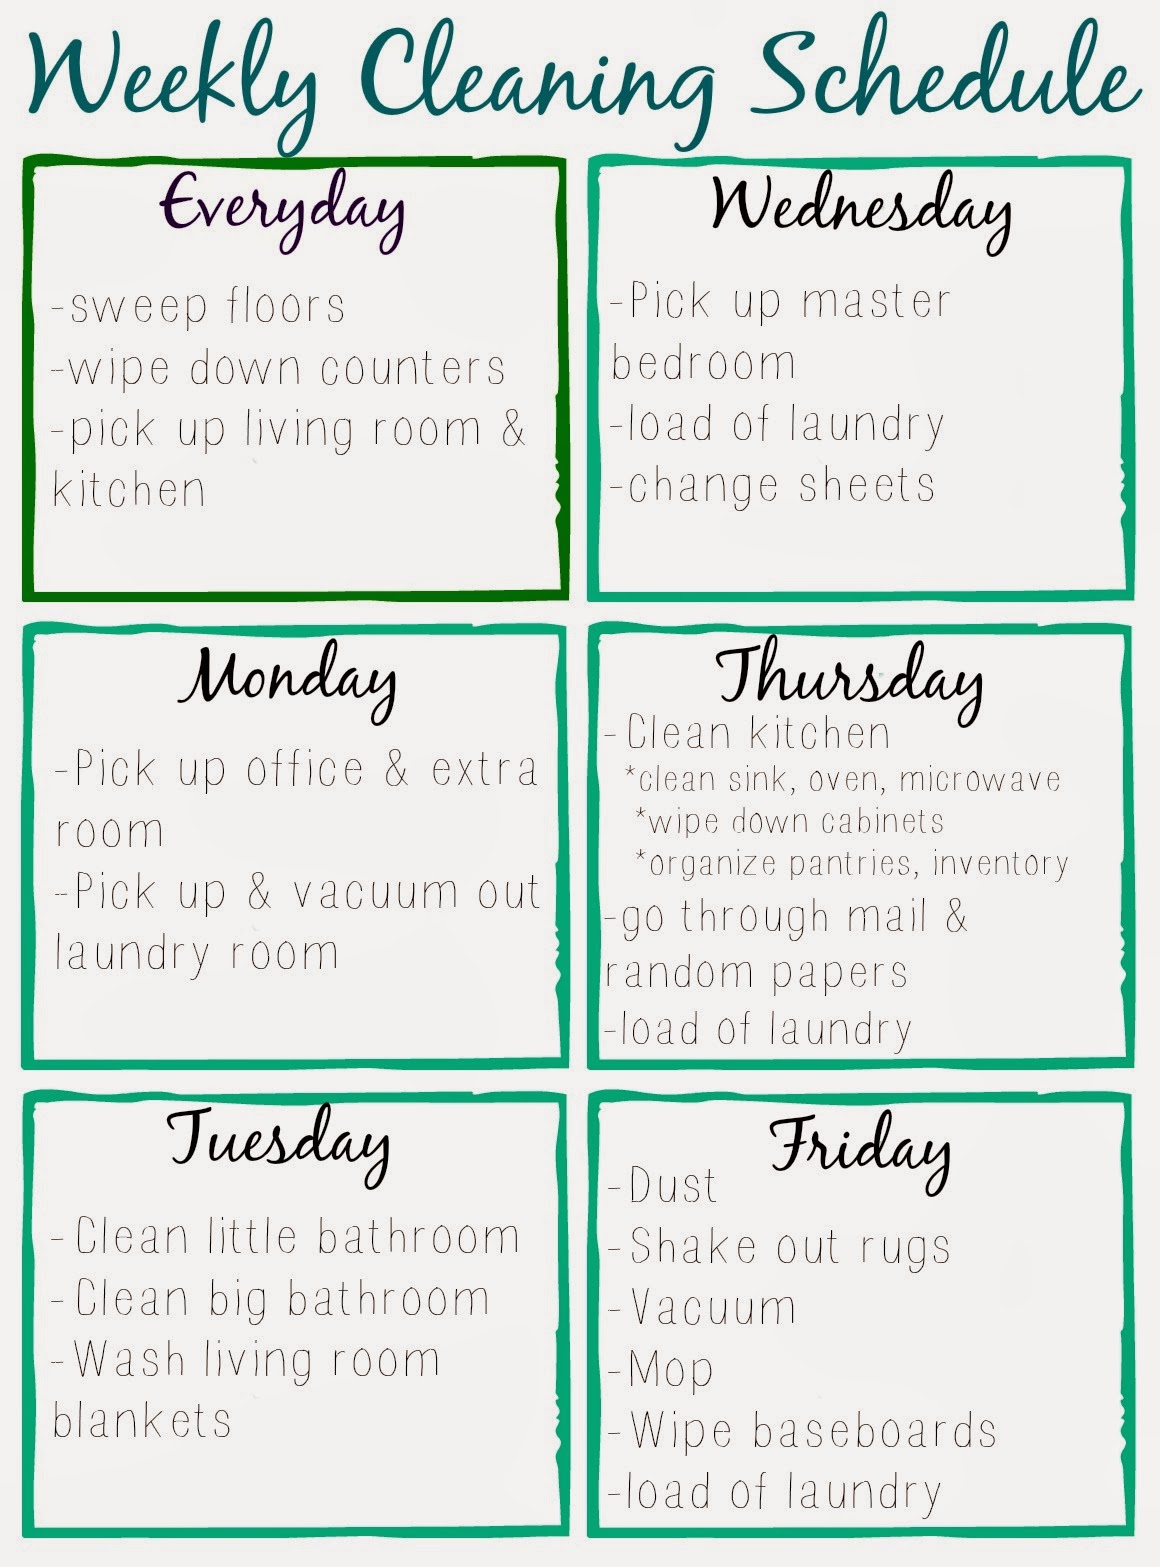 free-printable-house-cleaning-schedule-cleaning-schedule-free